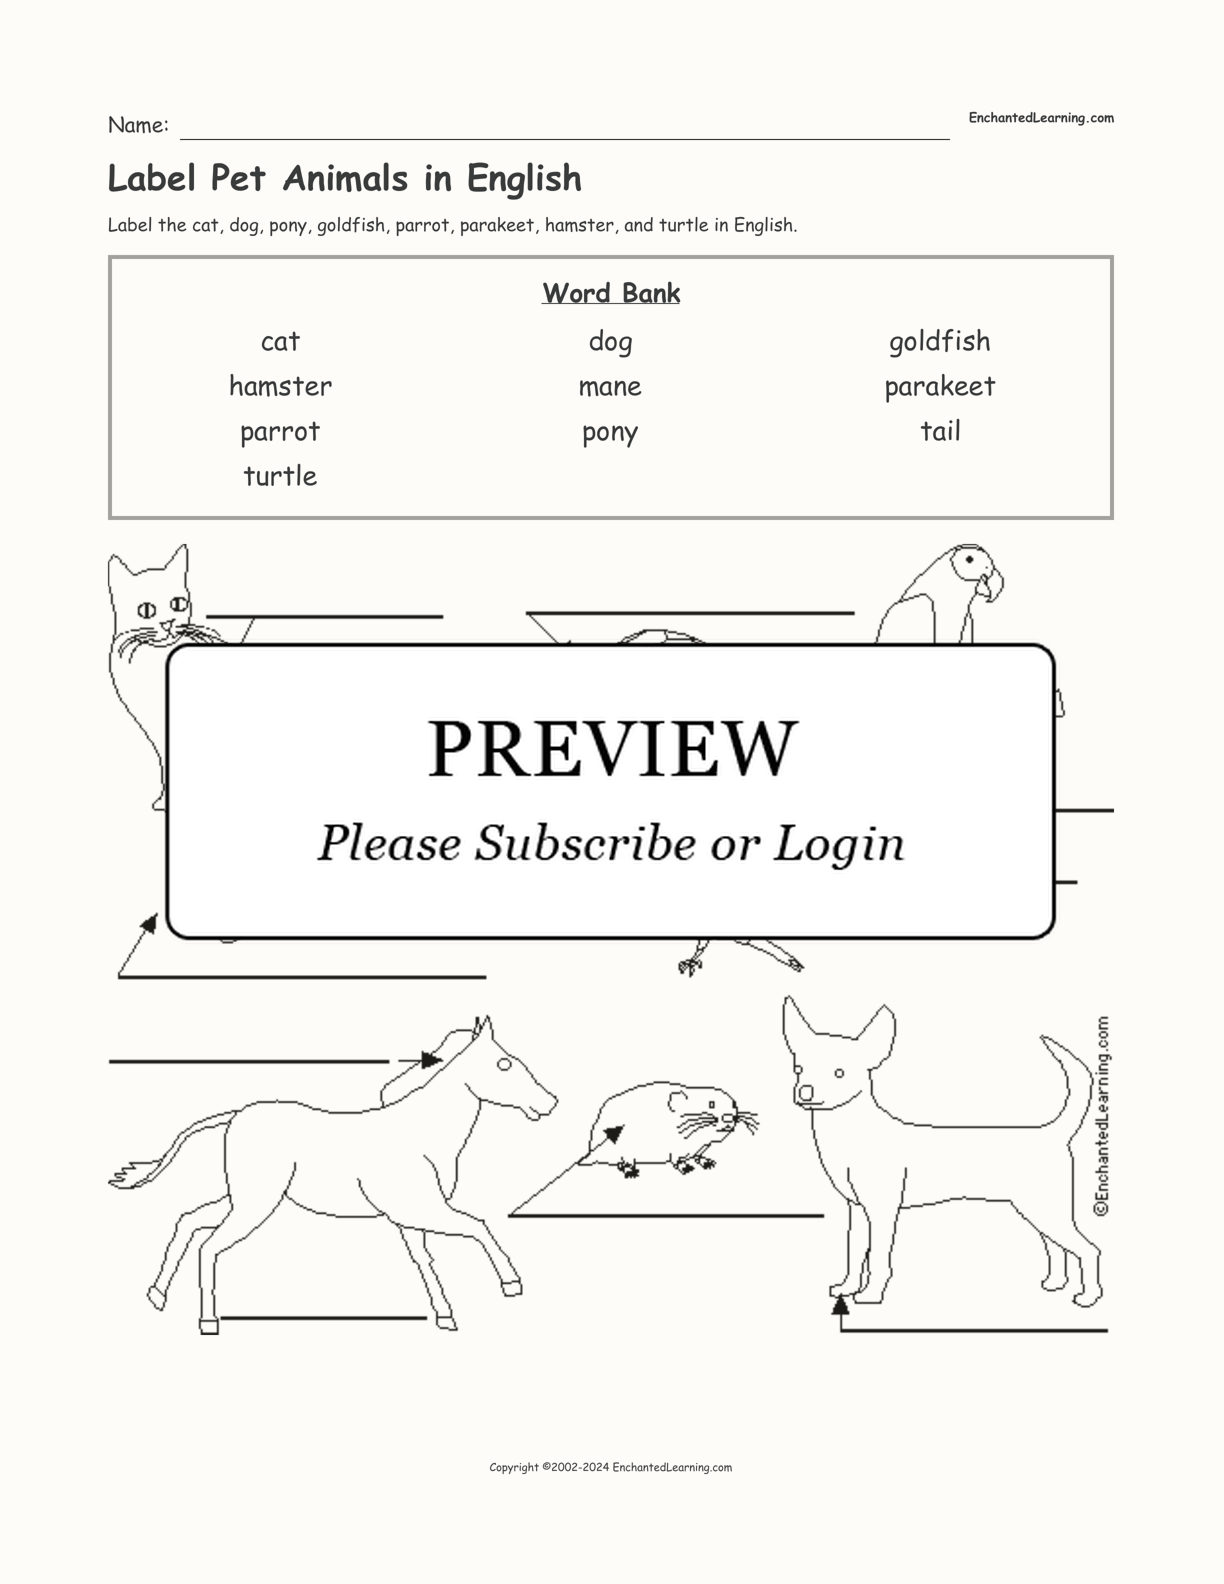 Label Pet Animals in English interactive worksheet page 1